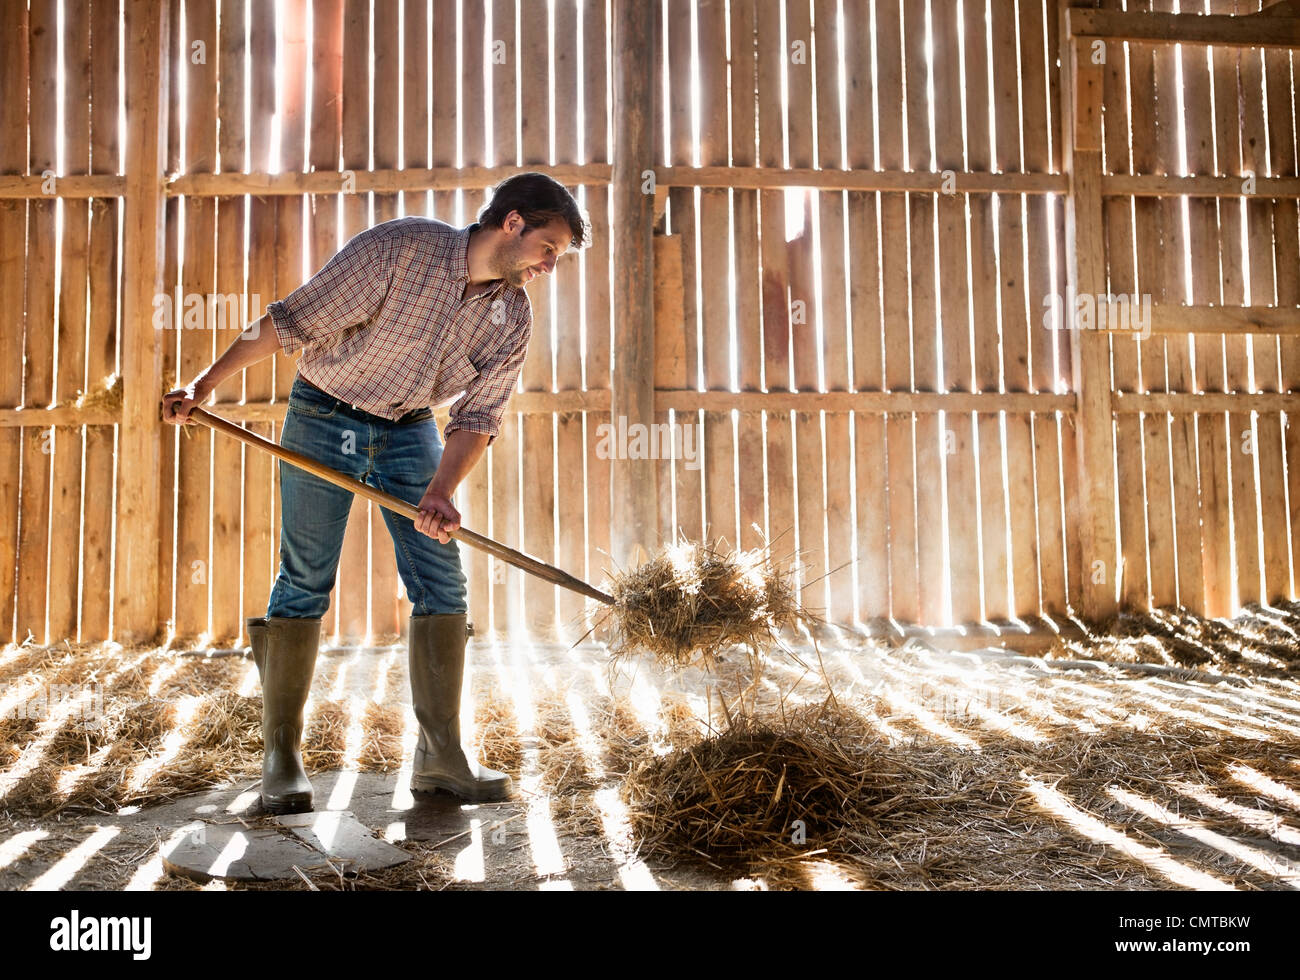 Farmer cleaning straw Stock Photo